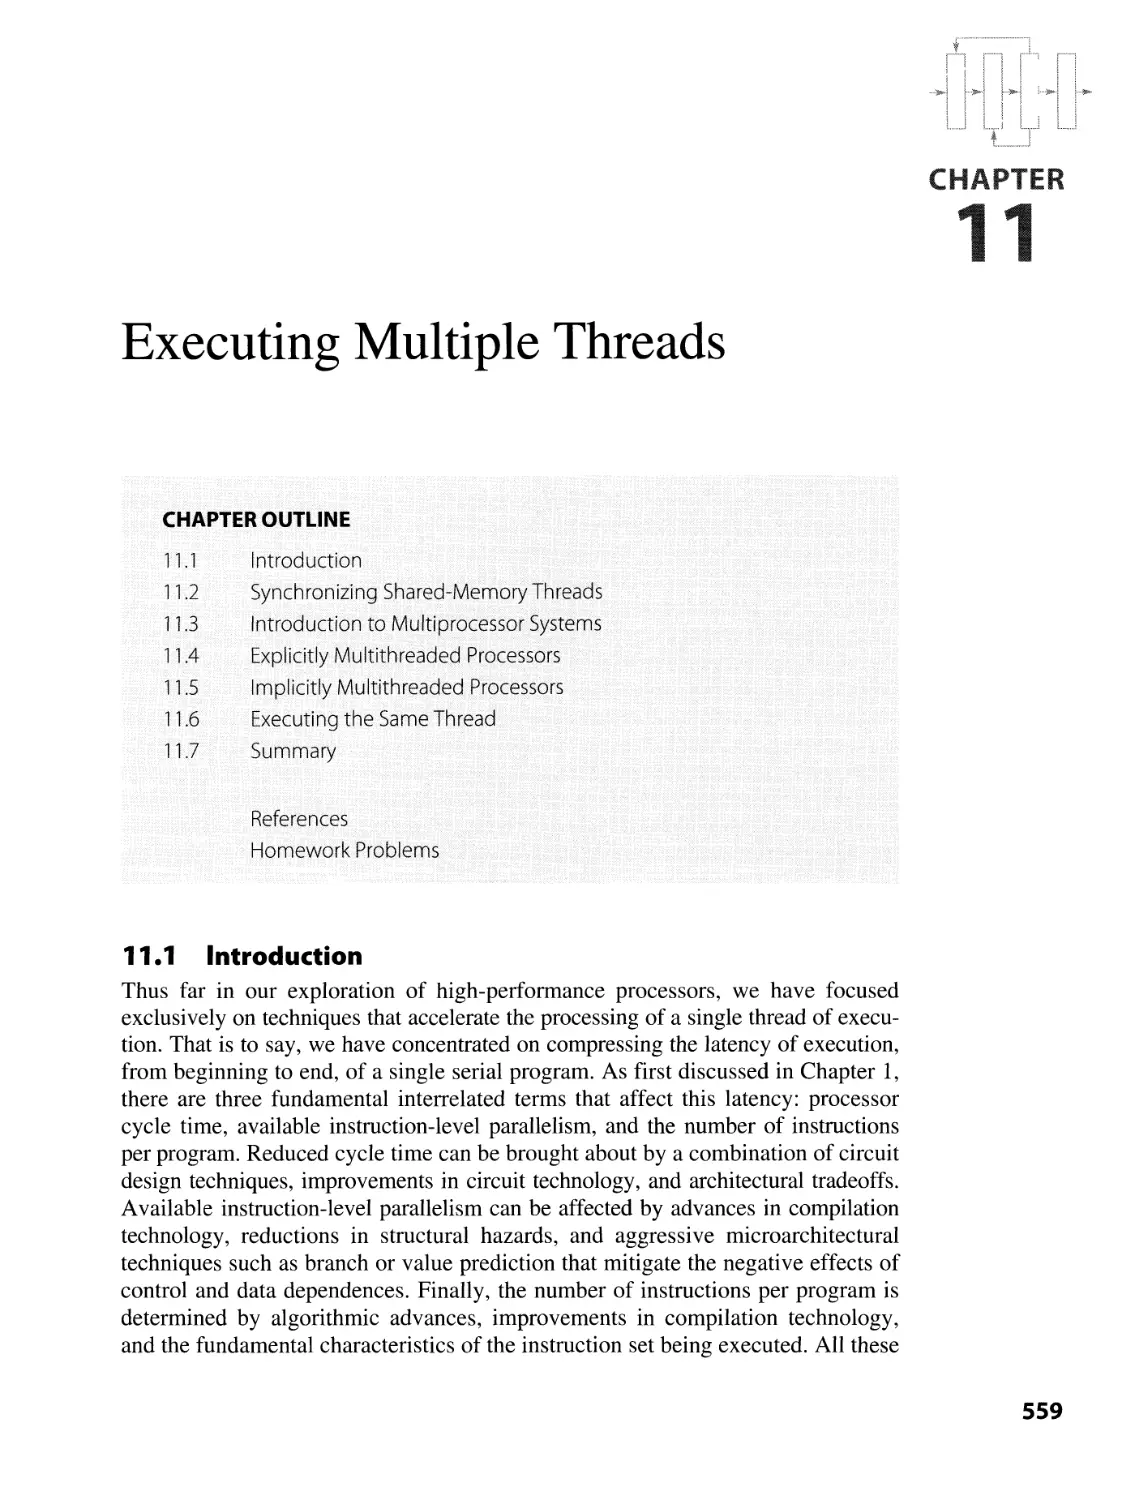 11. Executing Multiple Threads
11.1 Introduction